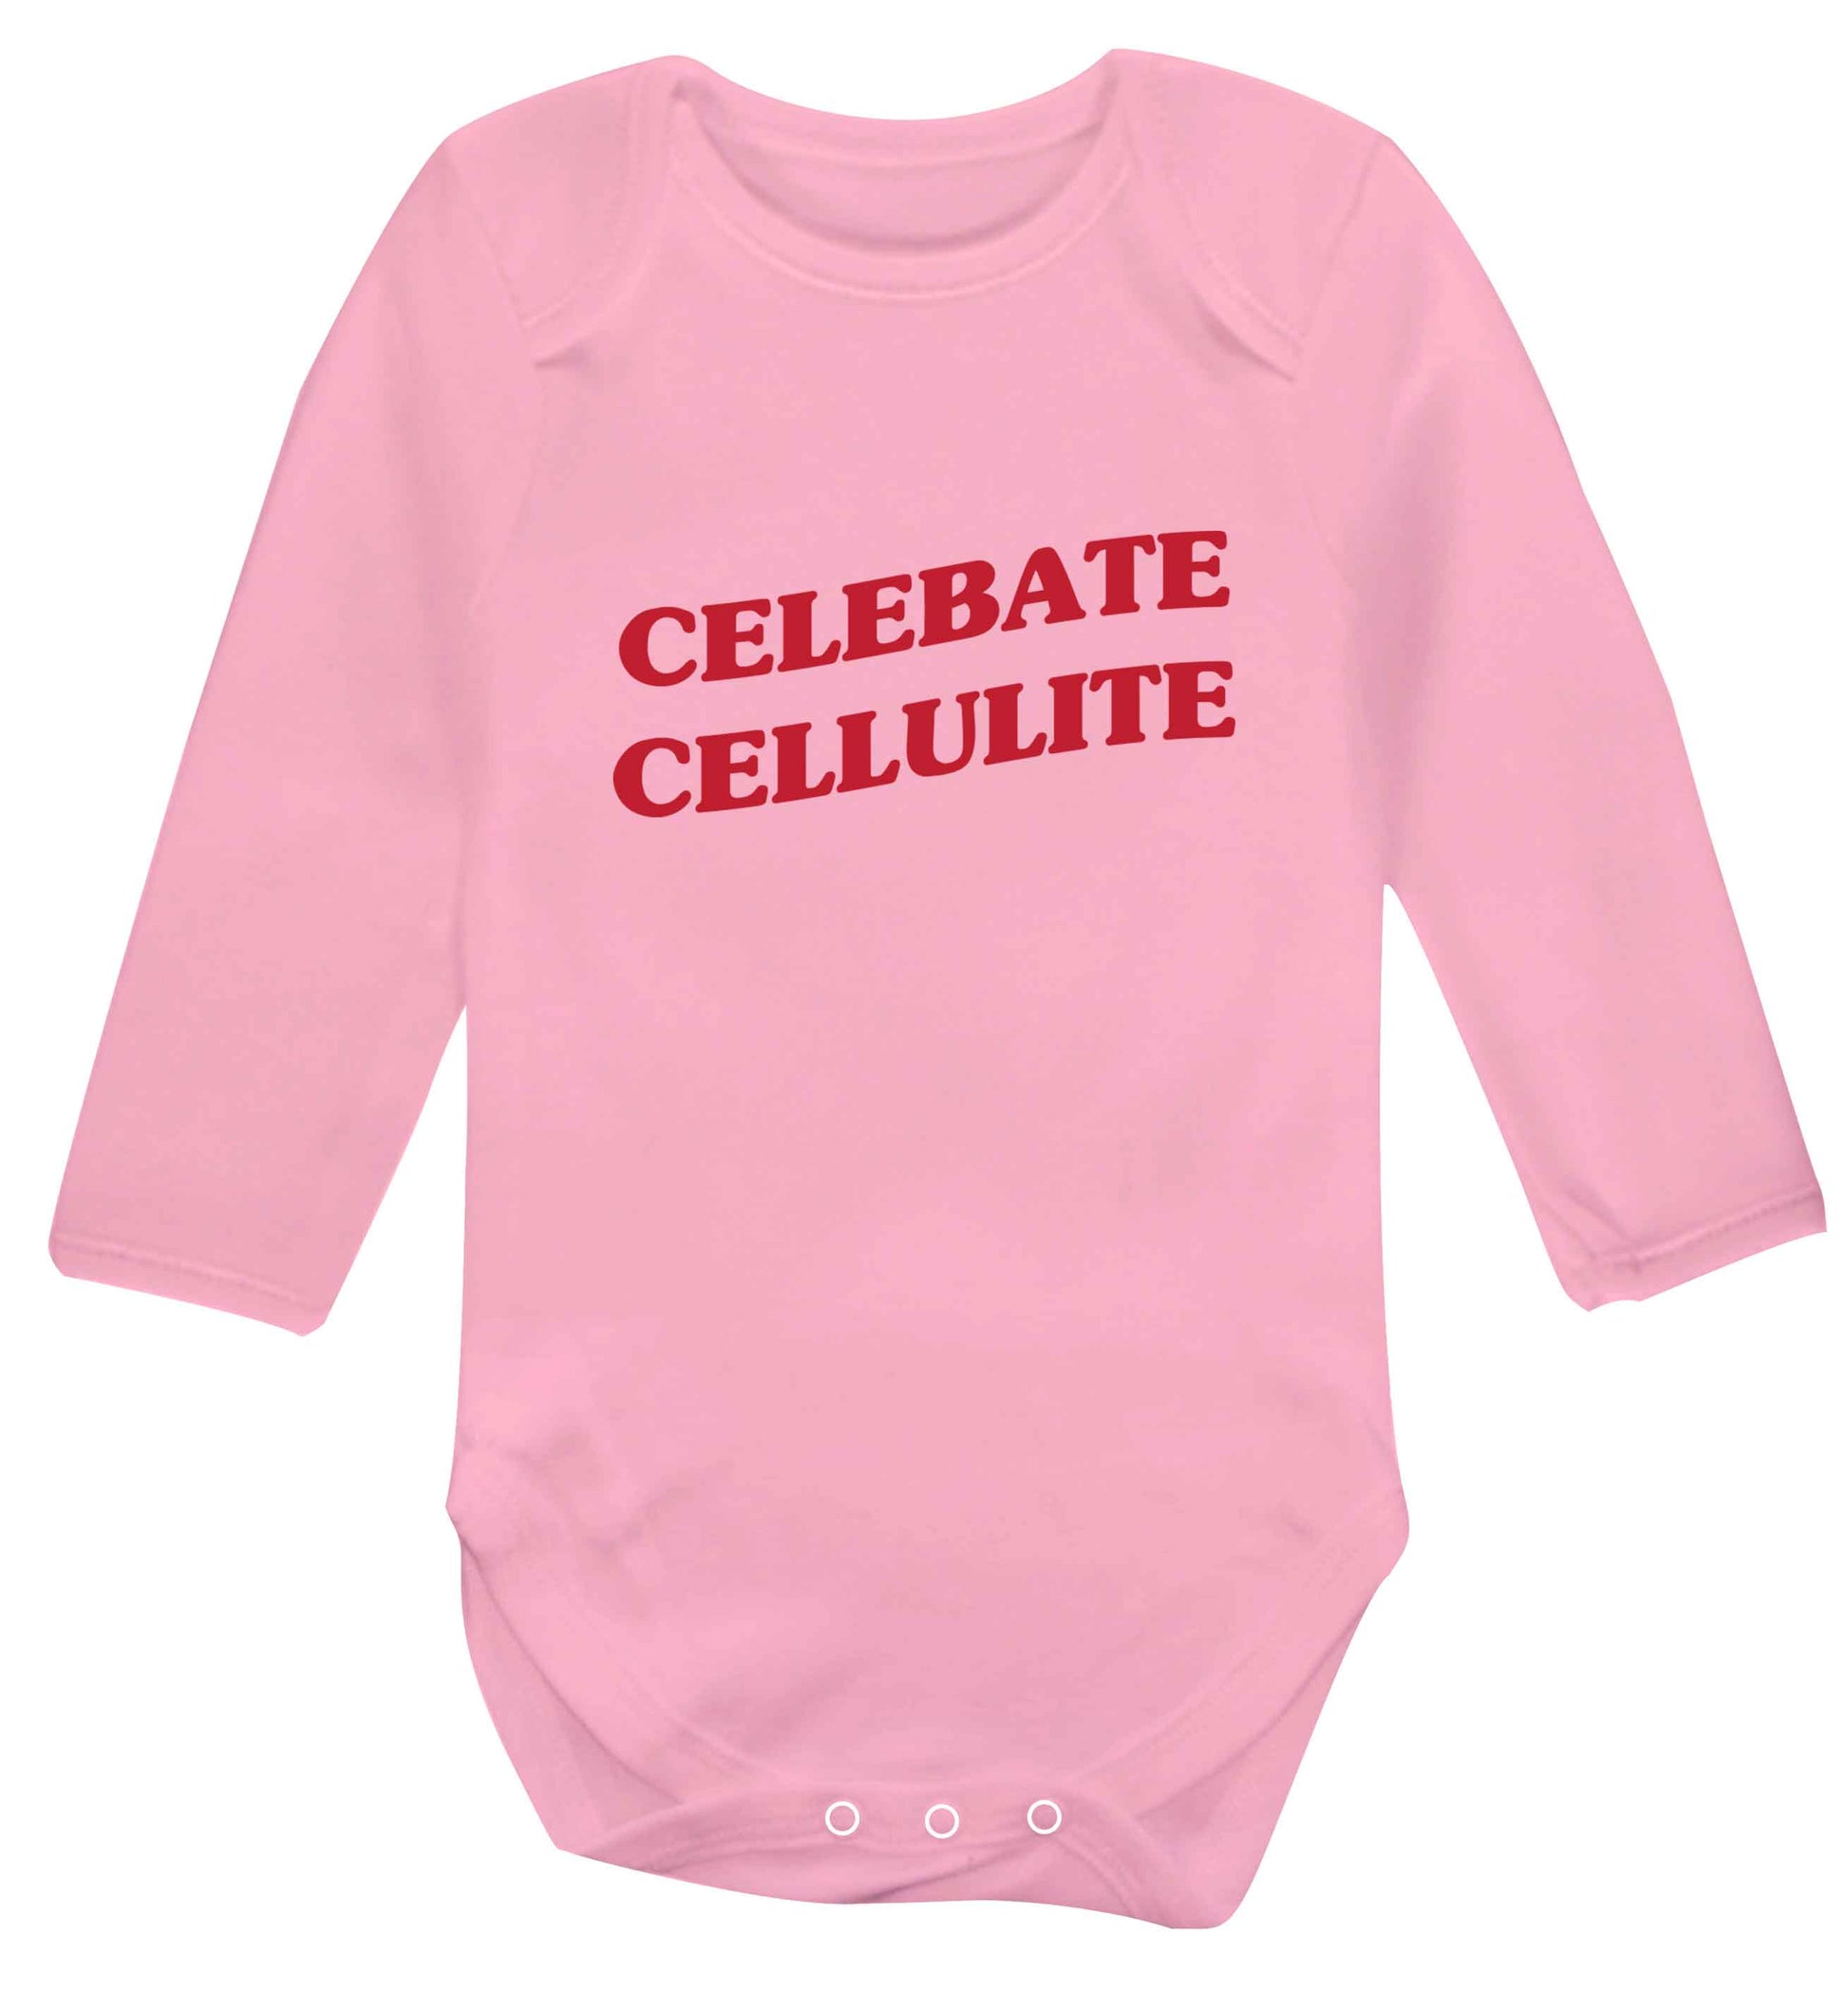 Celebrate cellulite baby vest long sleeved pale pink 6-12 months